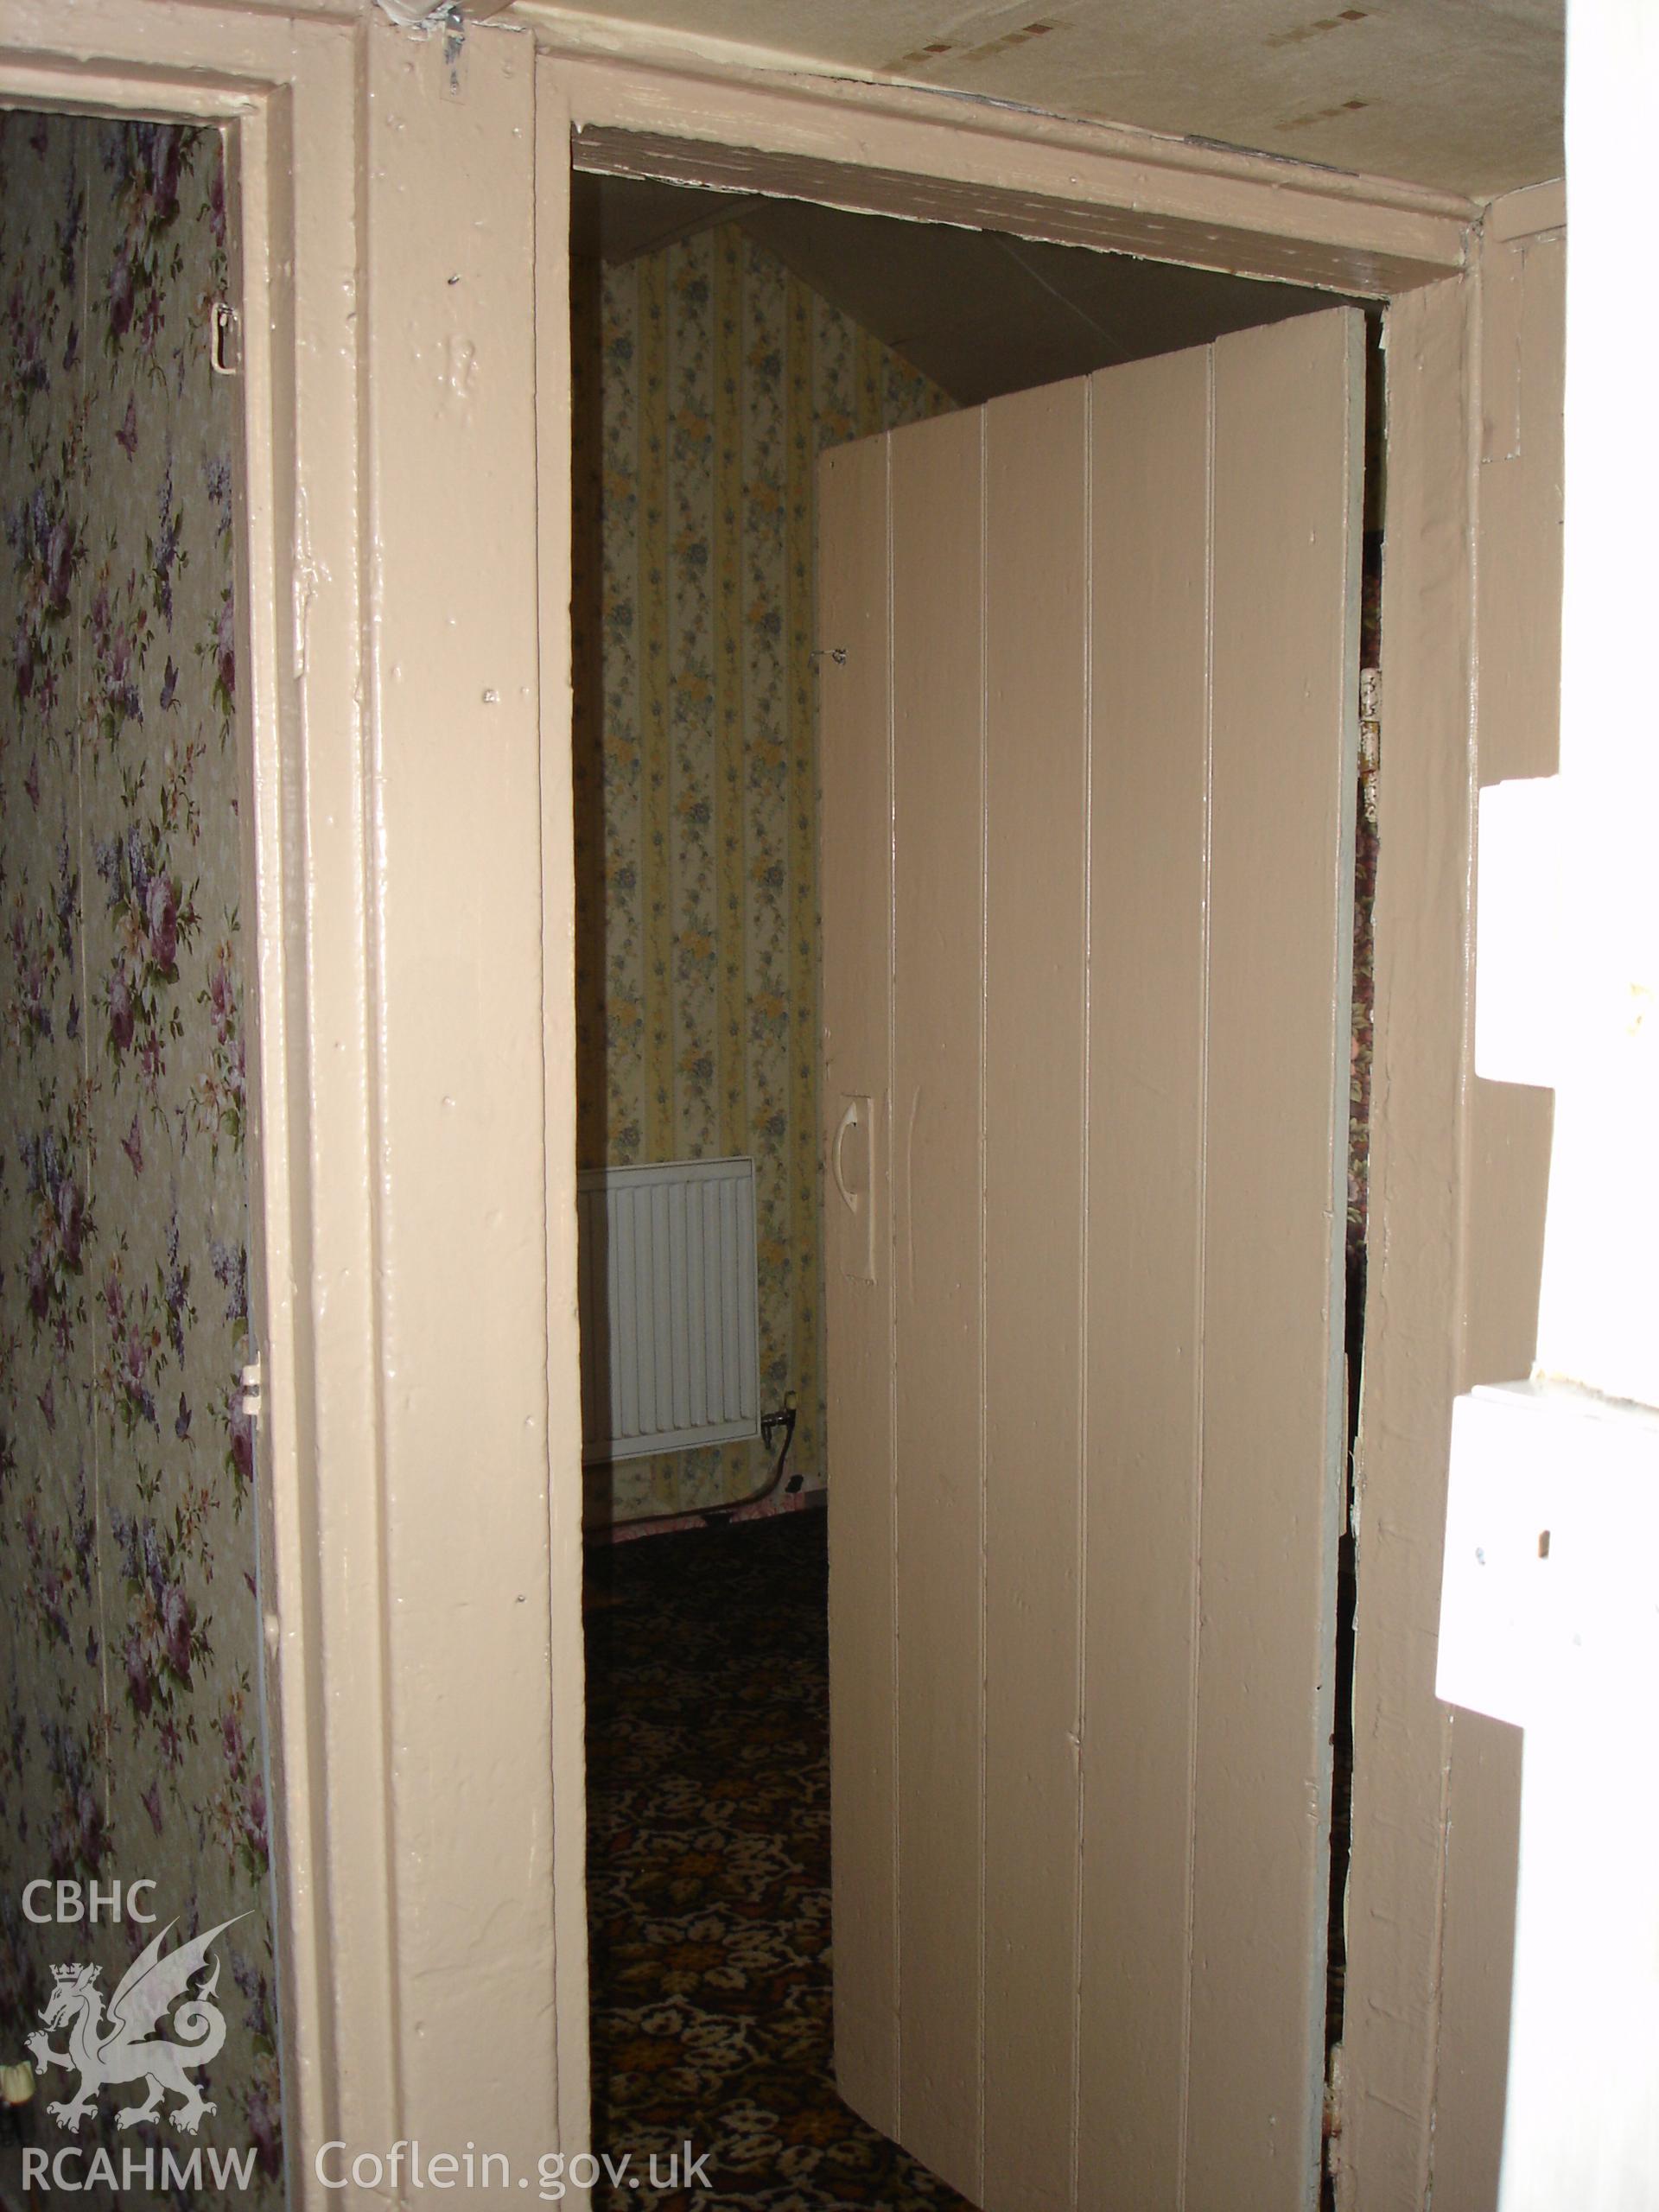 Colour digital photograph showing interior view (doorways) of a cottage at Gelli Houses, Cymmer.